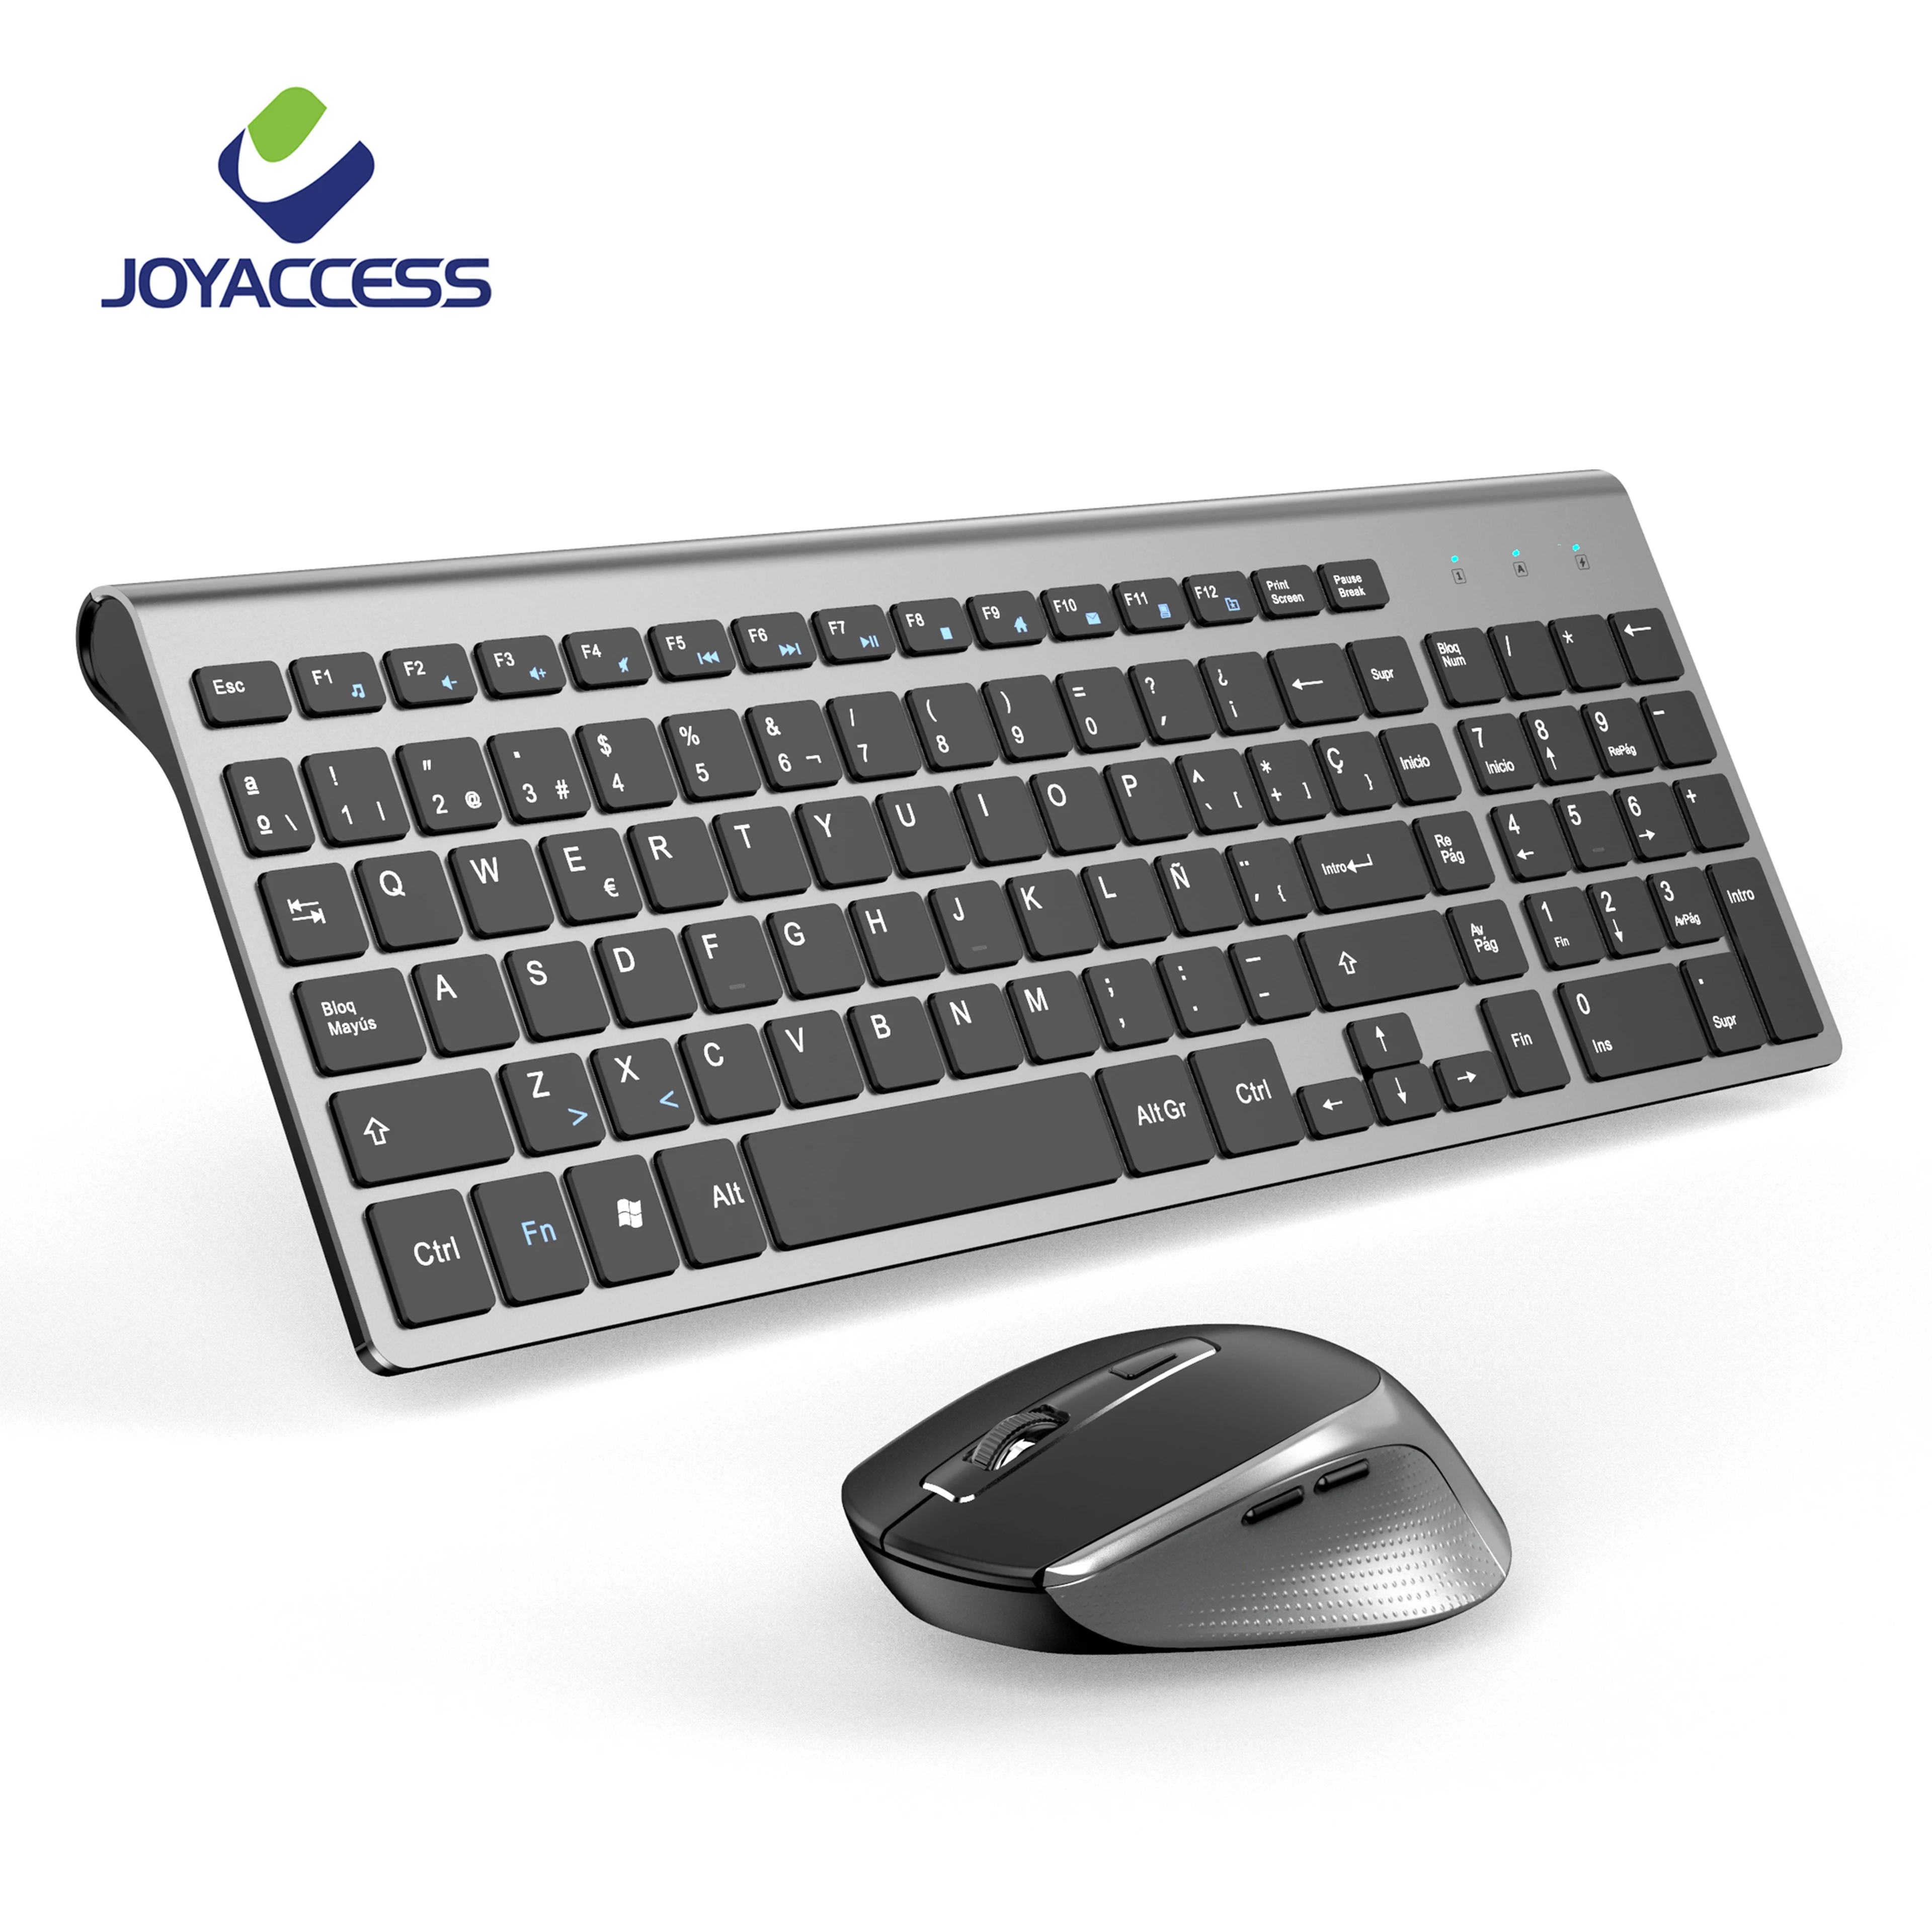 

Spanish Layout 2.4GHz Wireless Keyboard and Mouse Combo Slim Keyboard with "Ã‘" Ergonomic Mouse with Side Buttons for Office PC